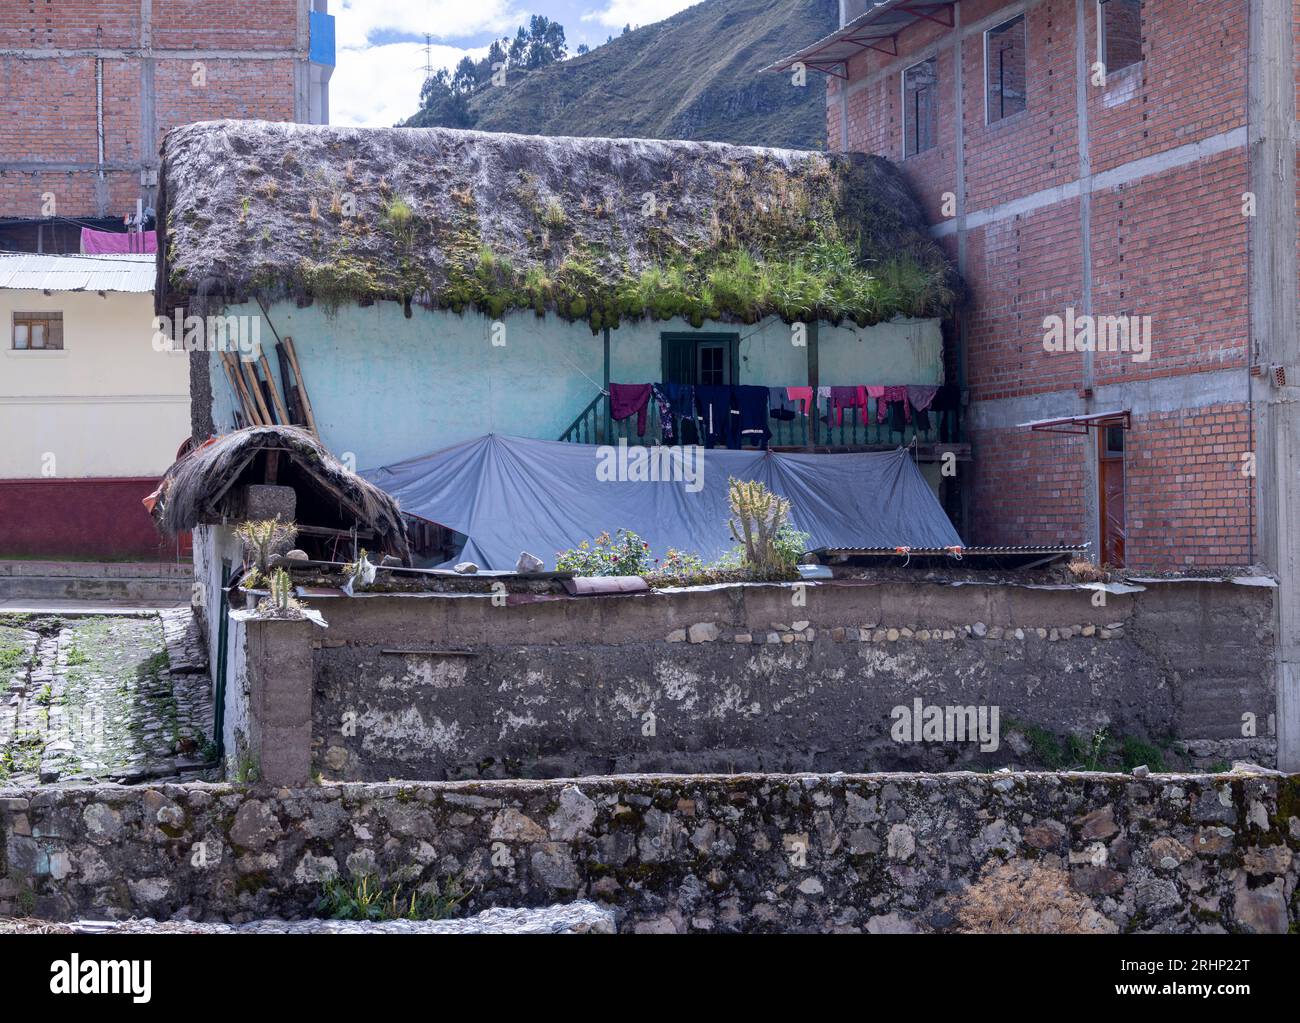 small thatched roof house beside later brick buildings, Catac, Peru, South America Stock Photo